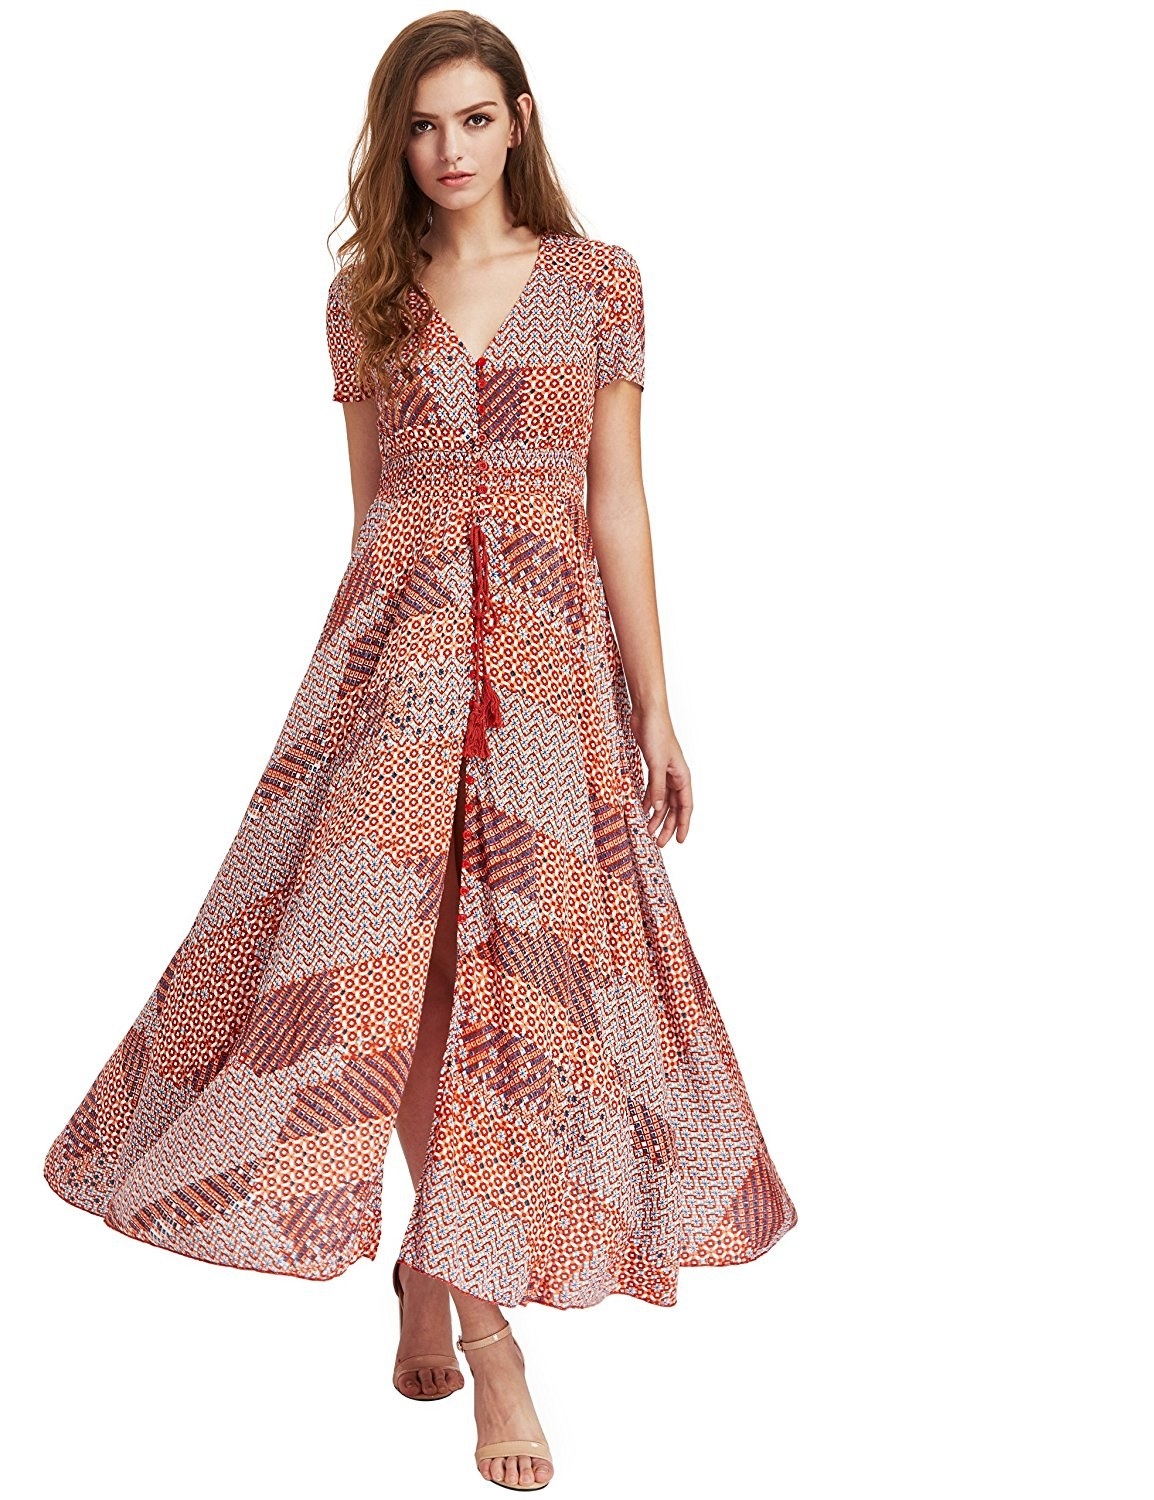 27 Of The Best Spring Dresses You Can Get On Amazon